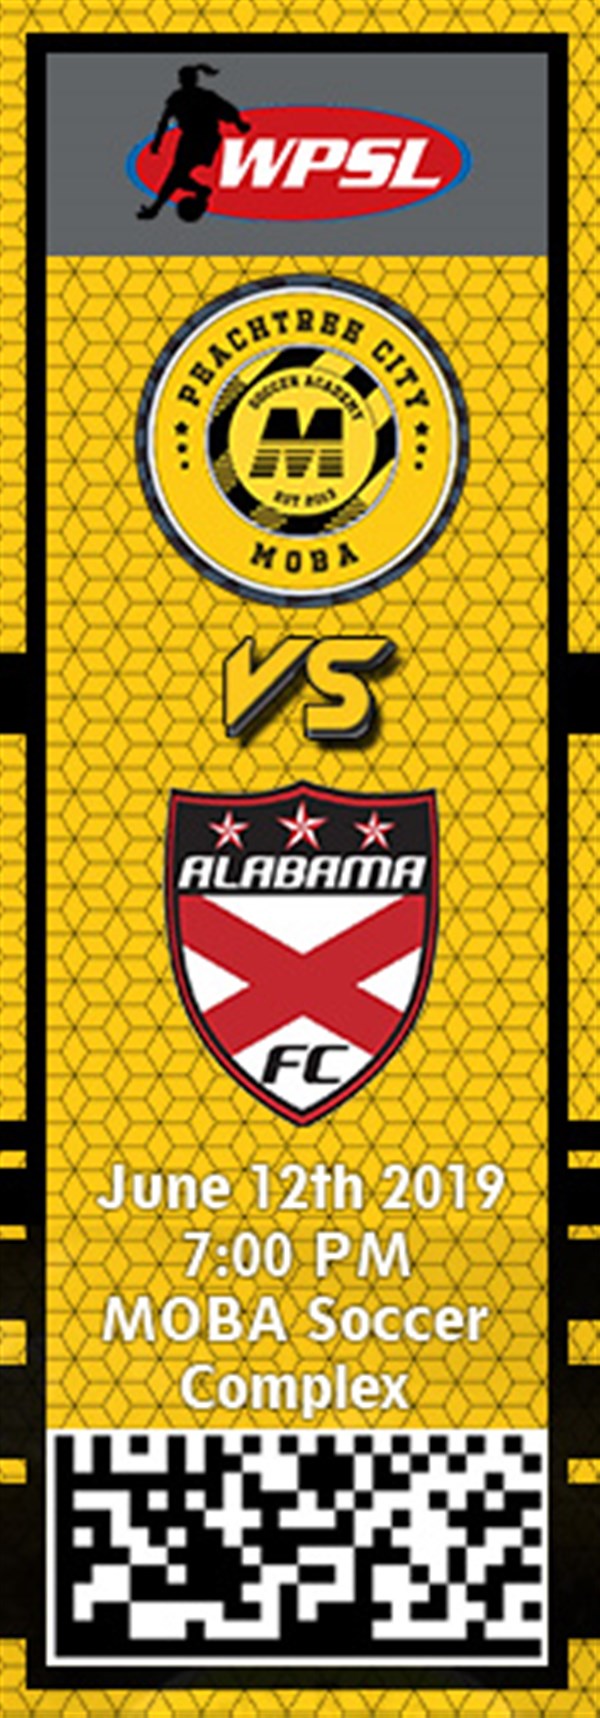 Get Information and buy tickets to PTC MOBA vs. Alabama FC WPSL on MOBA Soccer Academy